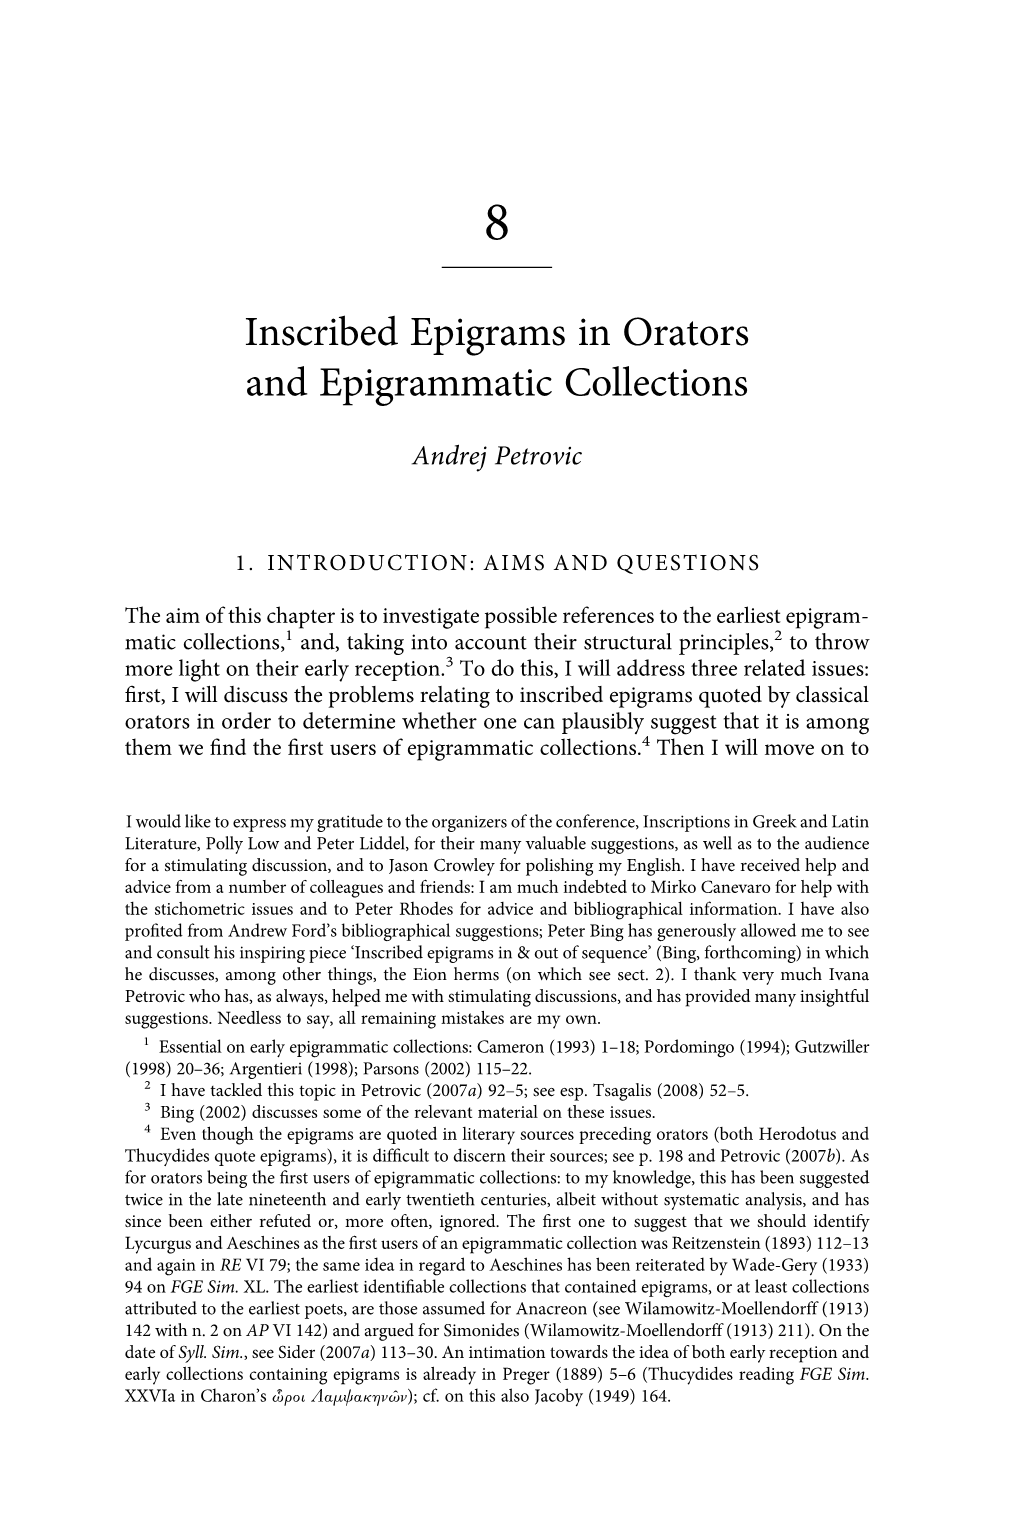 Inscribed Epigrams in Orators and Epigrammatic Collections